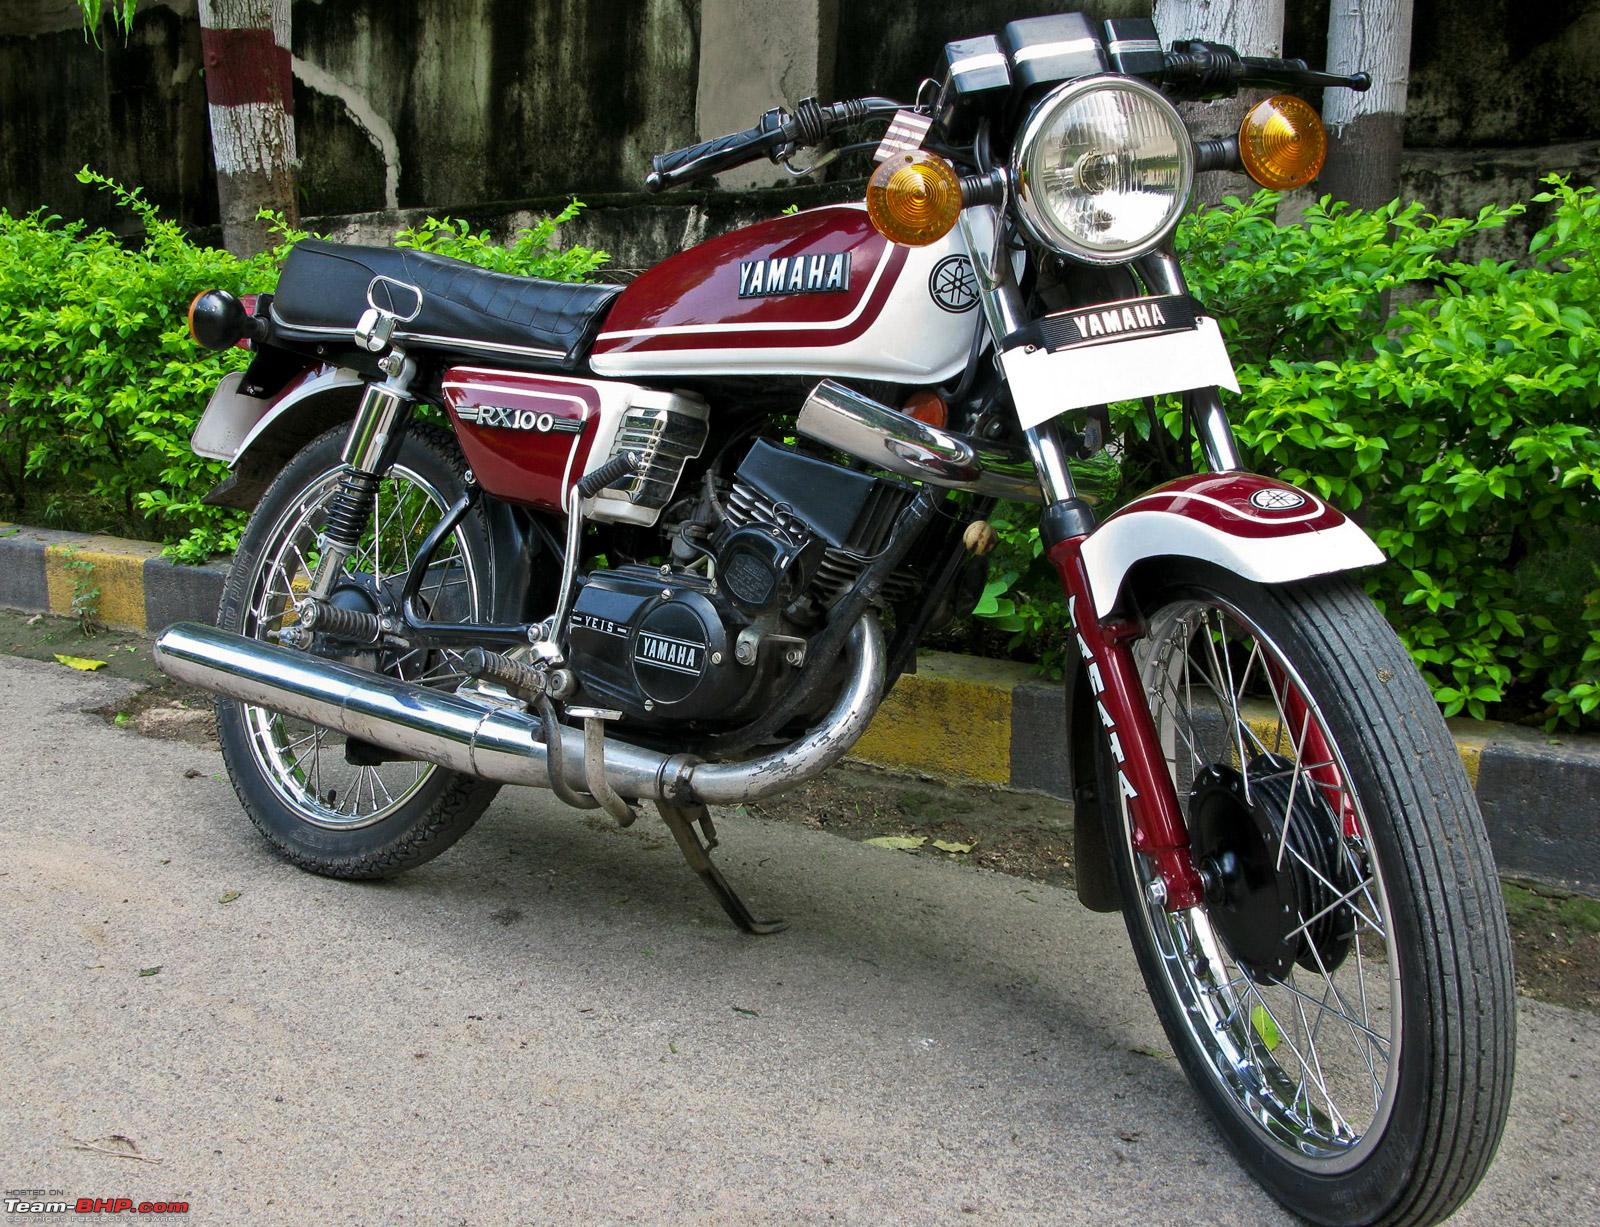 2 Stroke Motorcycle Legends Of India Yamaha Rx100 Rd 350 To